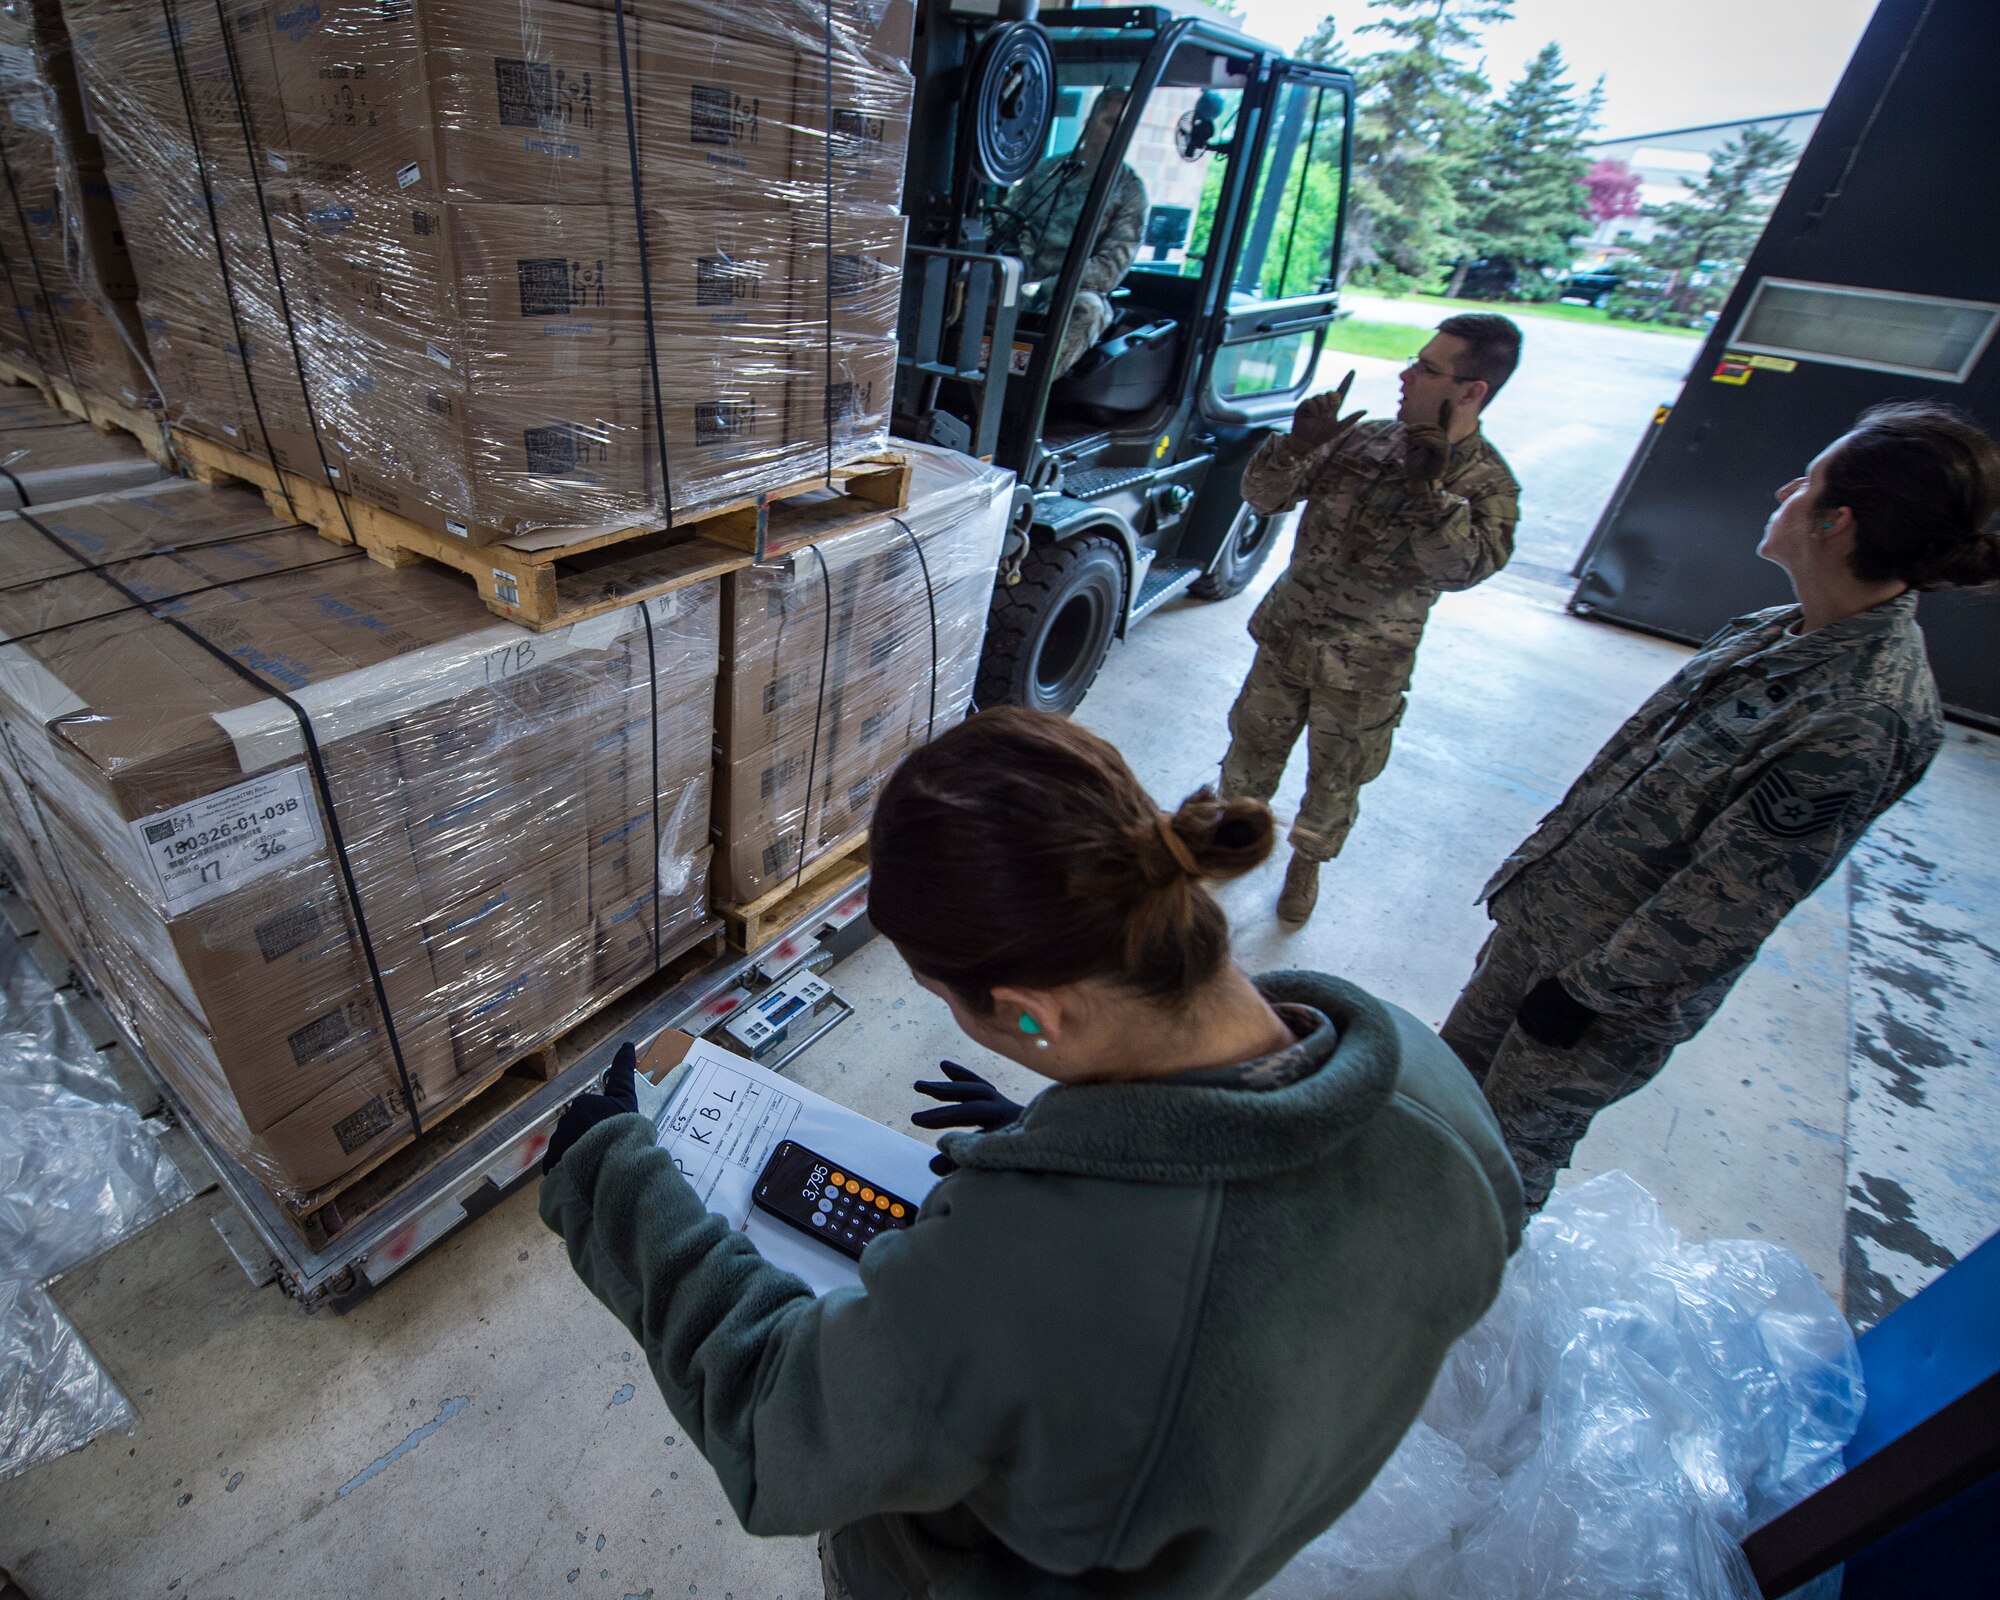 U.S. Air Force Airmen with the 133rd Small Air Terminal load boxes of food onto pallets in St. Paul, May 18, 2019.